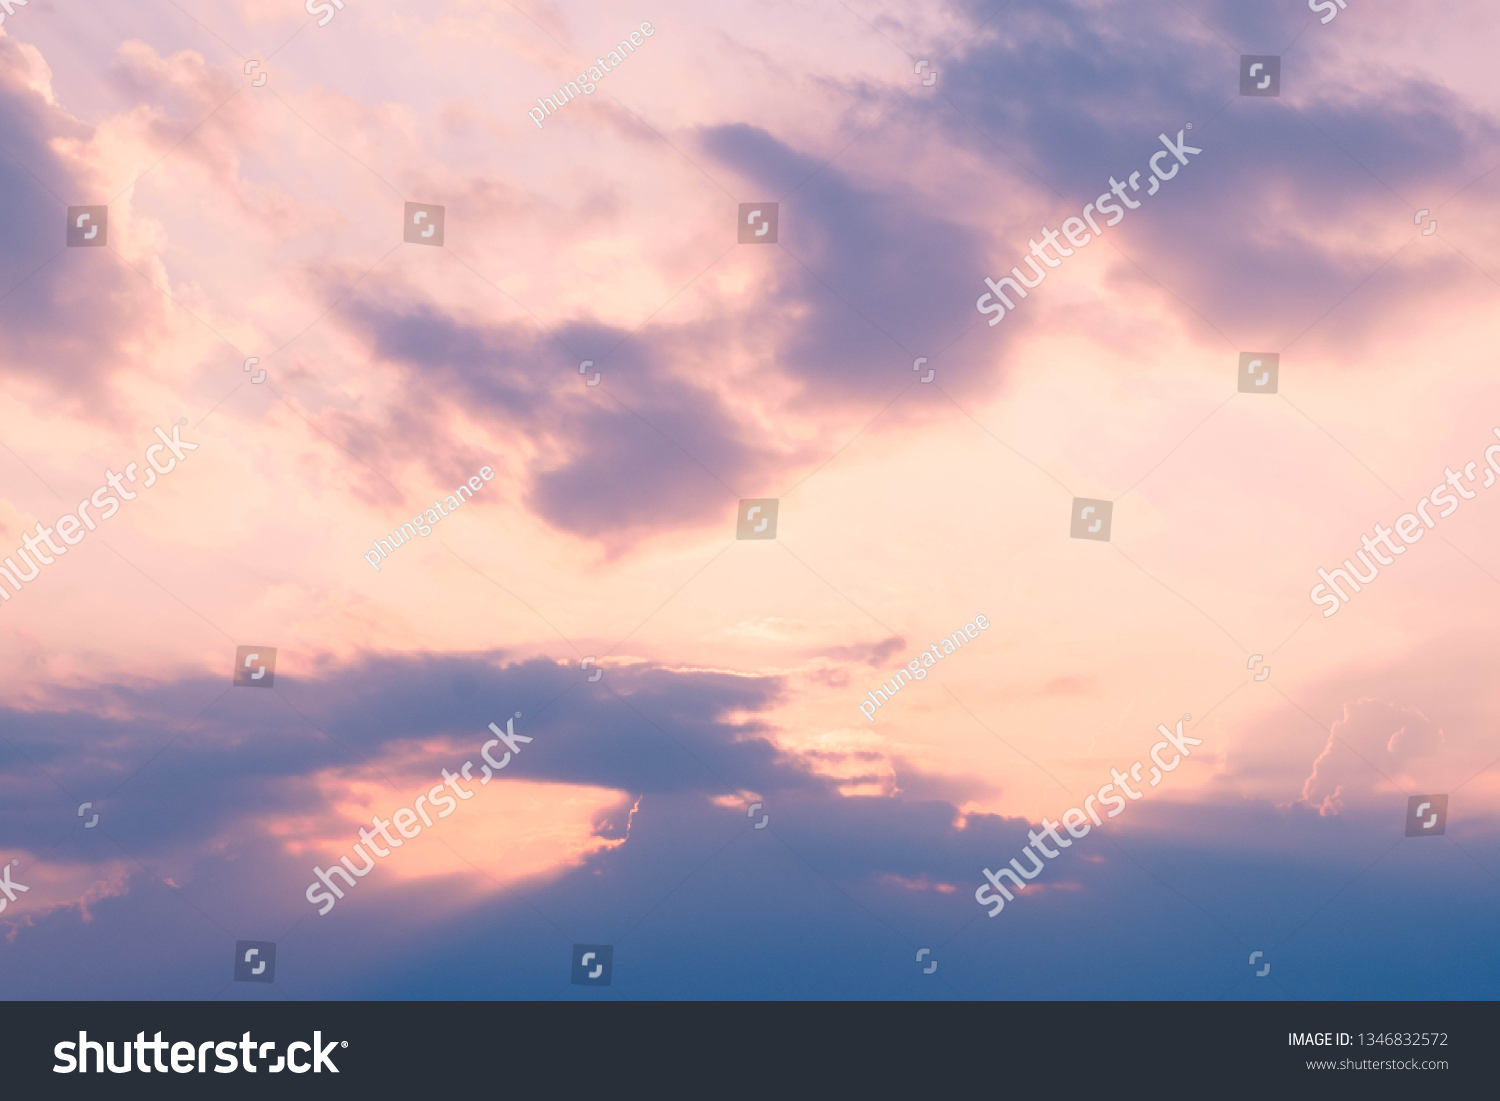 Colorful of skyscape with pink magenta yellow orange and blue shades exotic look like heaven #1346832572